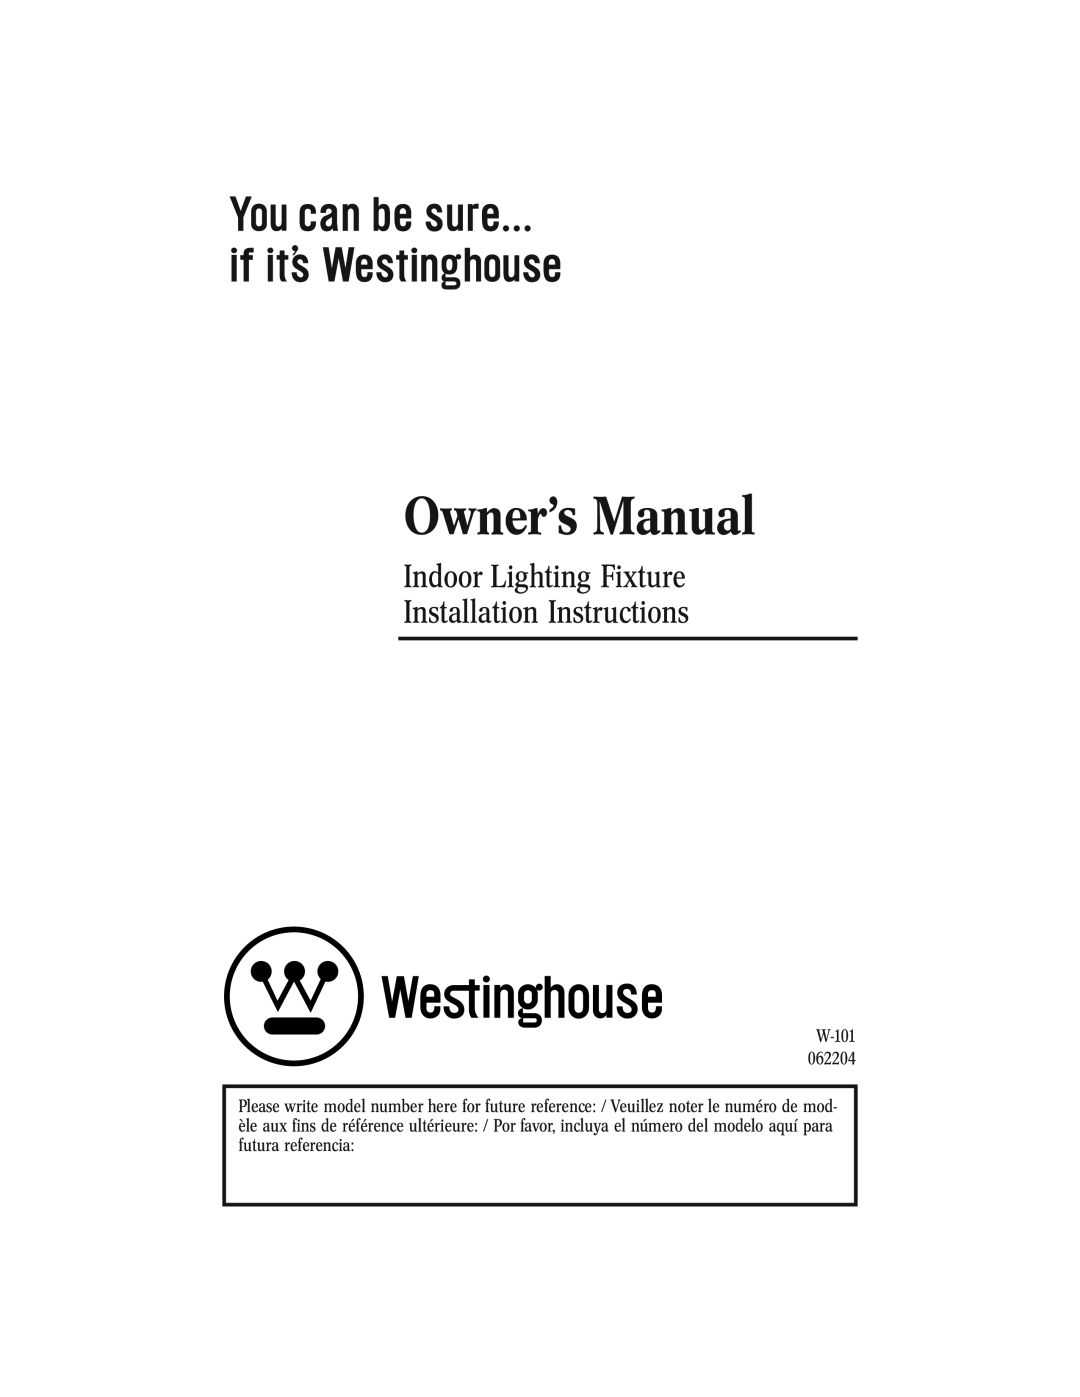 Westinghouse 62204 owner manual Indoor Lighting Fixture Installation Instructions 